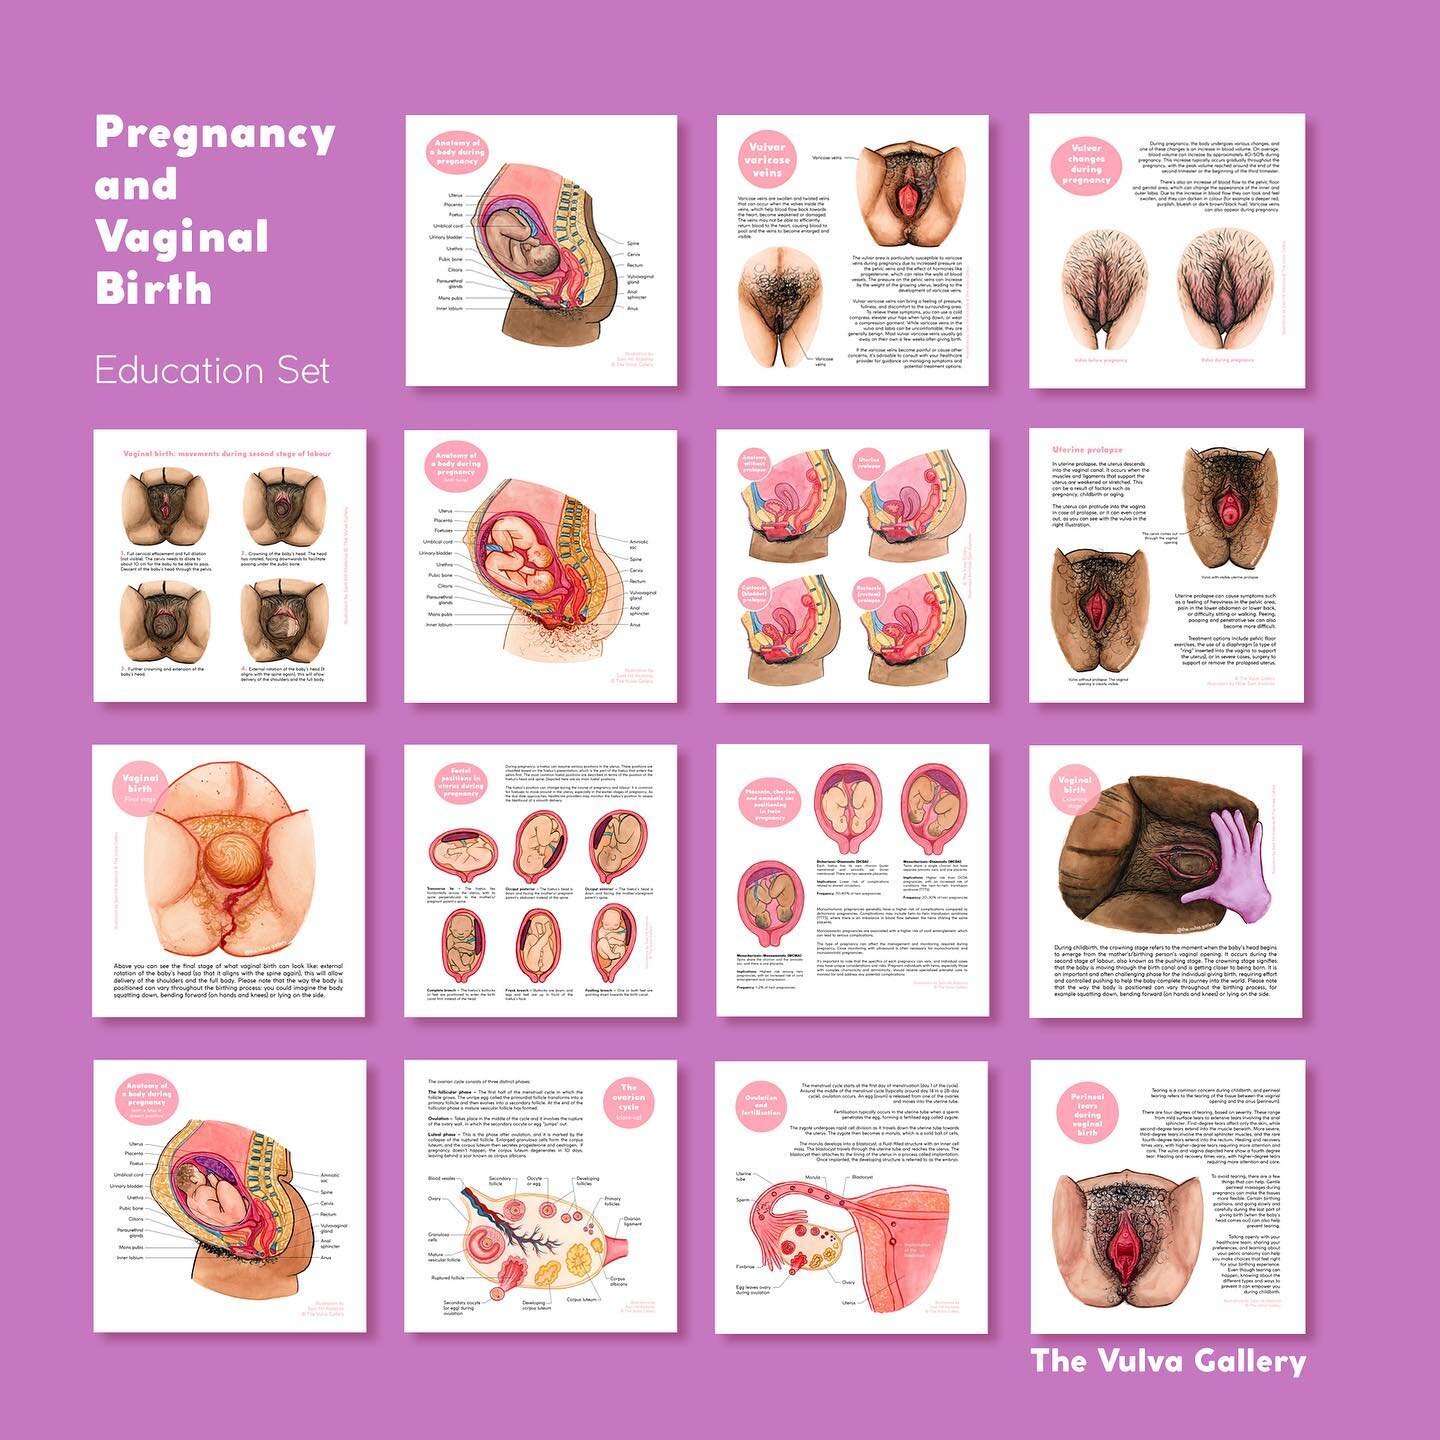 ⭐️ New education set! ⭐️ The illustrations of January&rsquo;s Pregnancy and Vaginal Birth month are now available as education set (print and digital) with all 15 anatomy illustrations 💛 You can find them in my webshop and Etsy shop (via my bio link